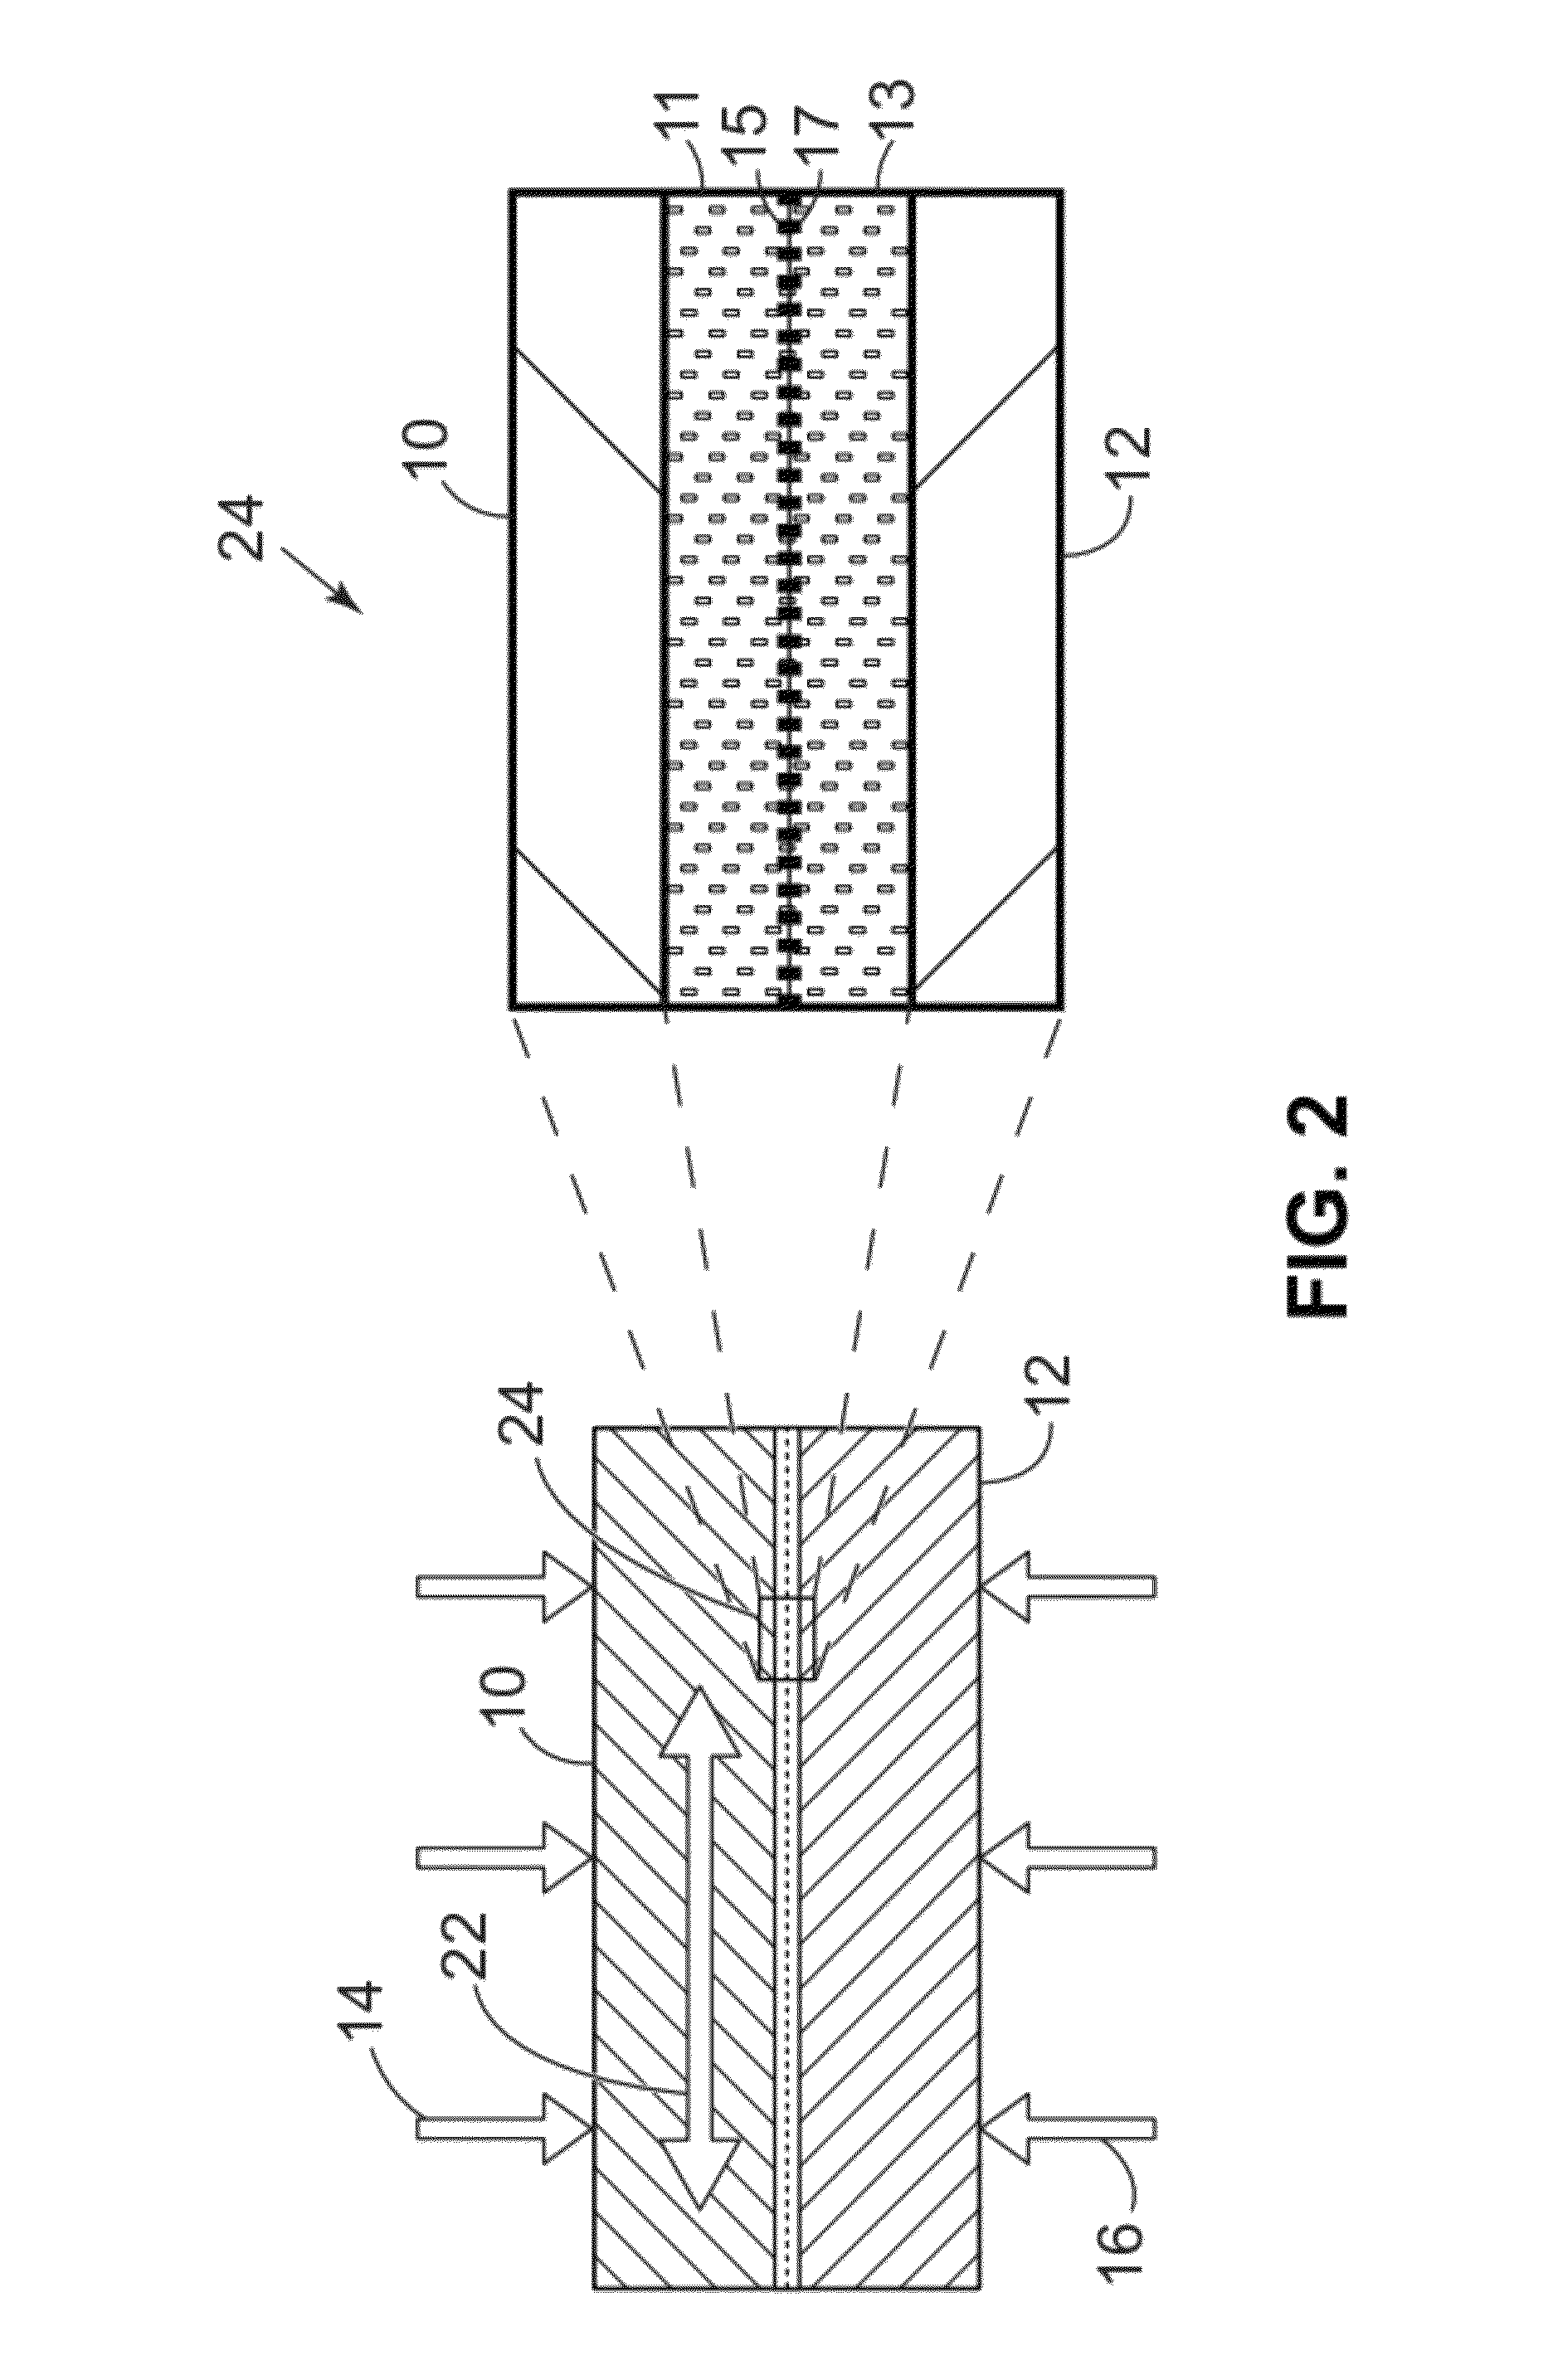 Composite biaxially textured substrates using ultrasonic consolidation